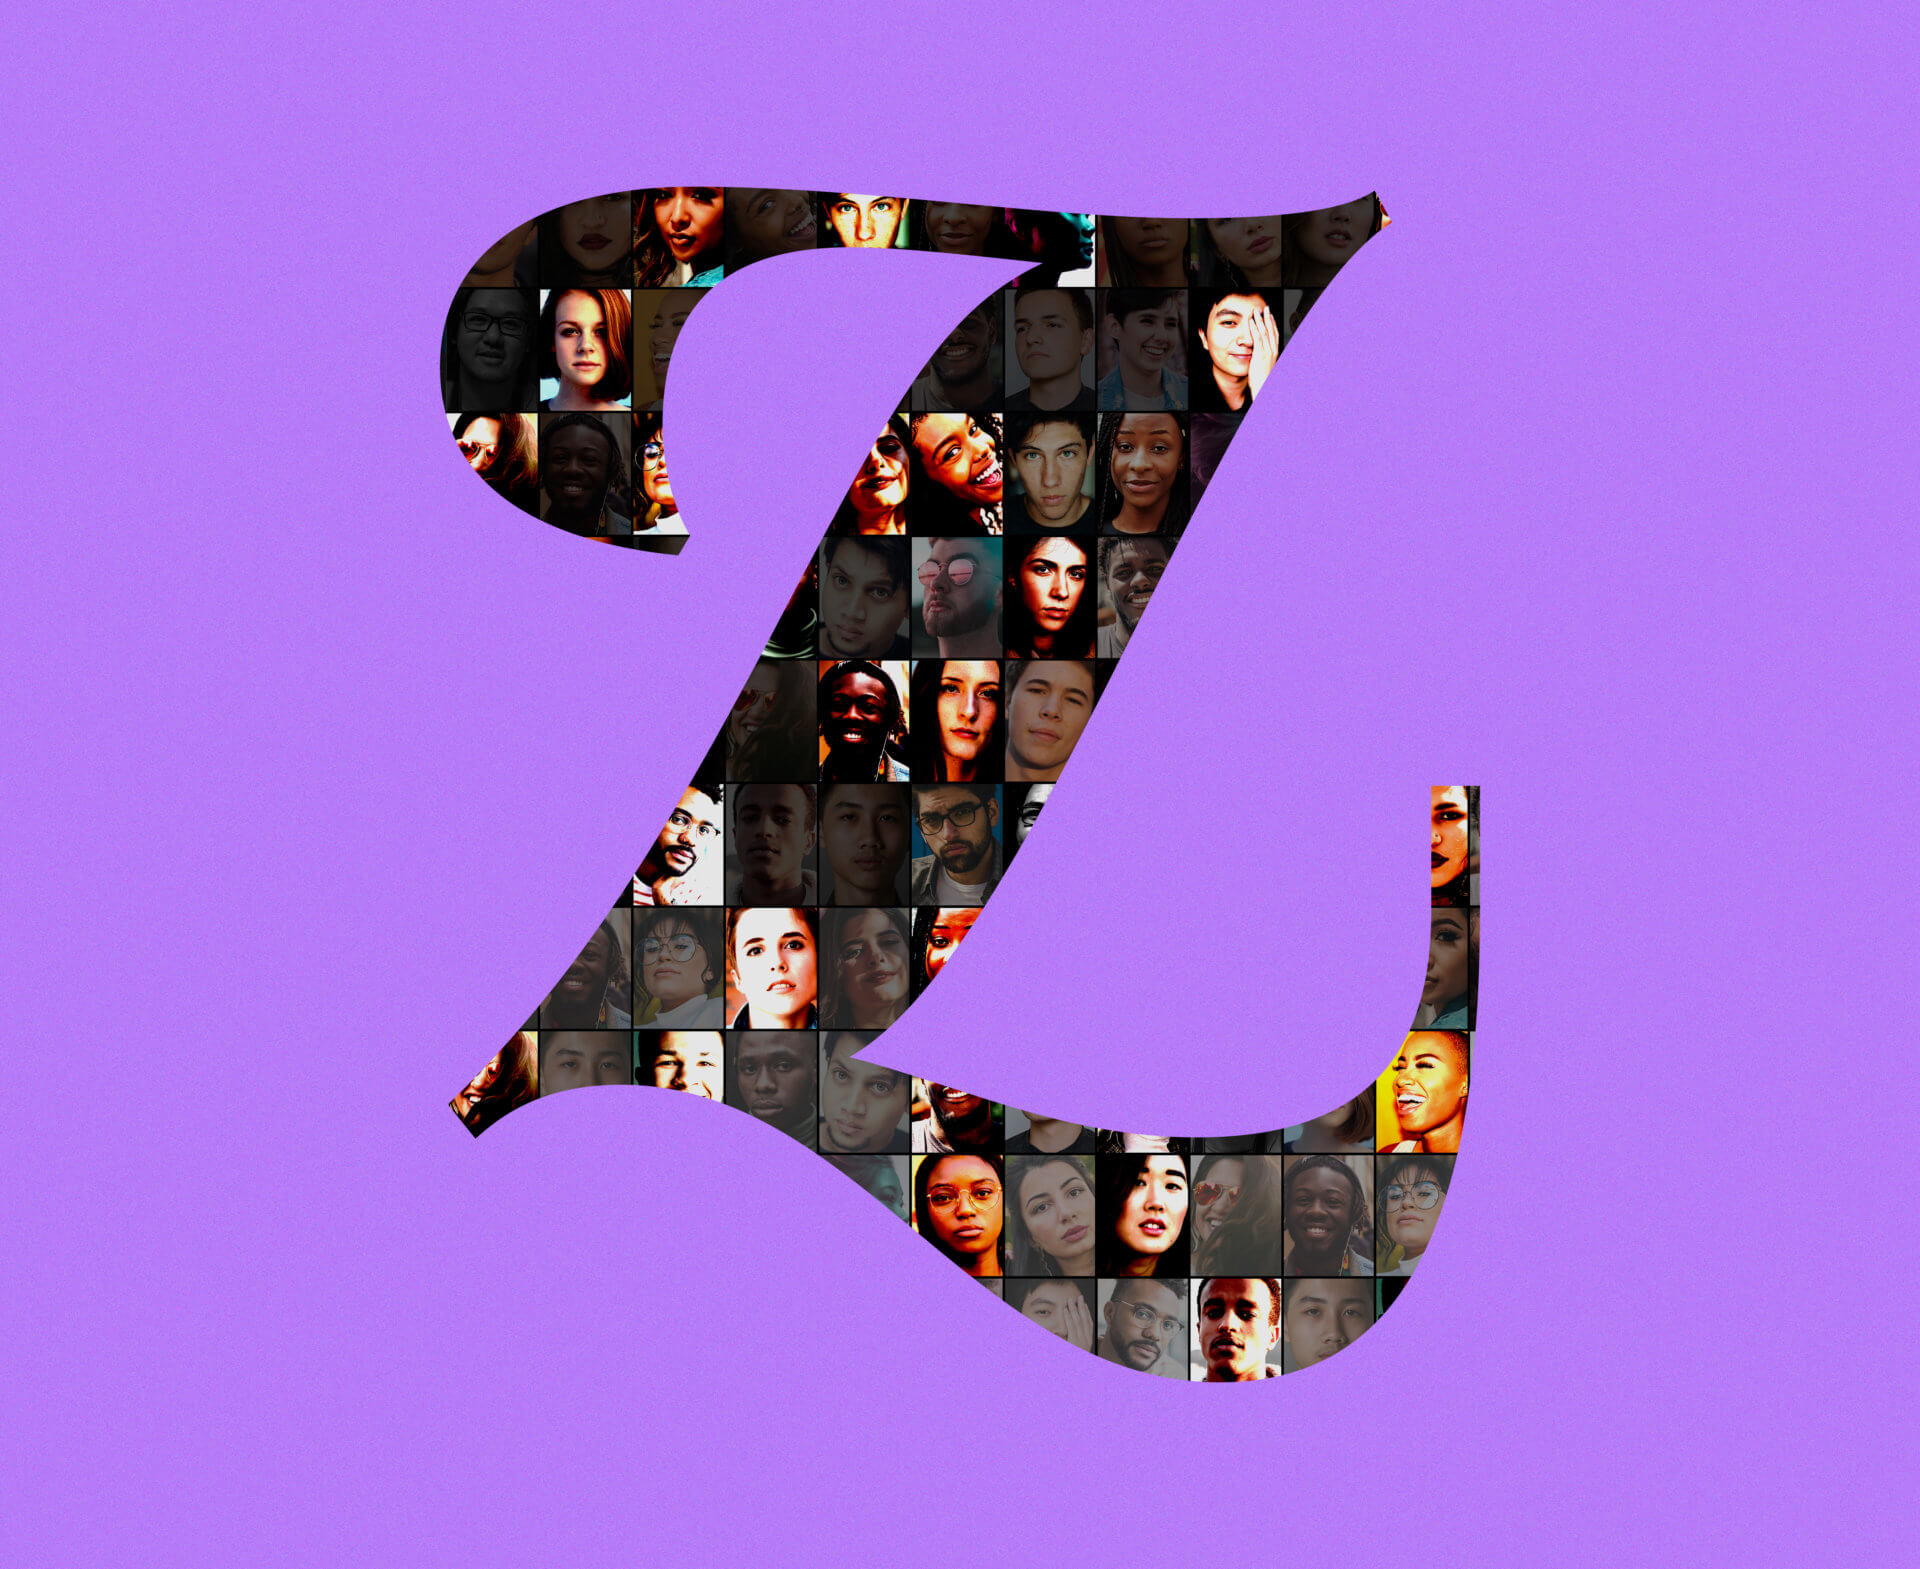 The letter Z which a collage of people pictured inside